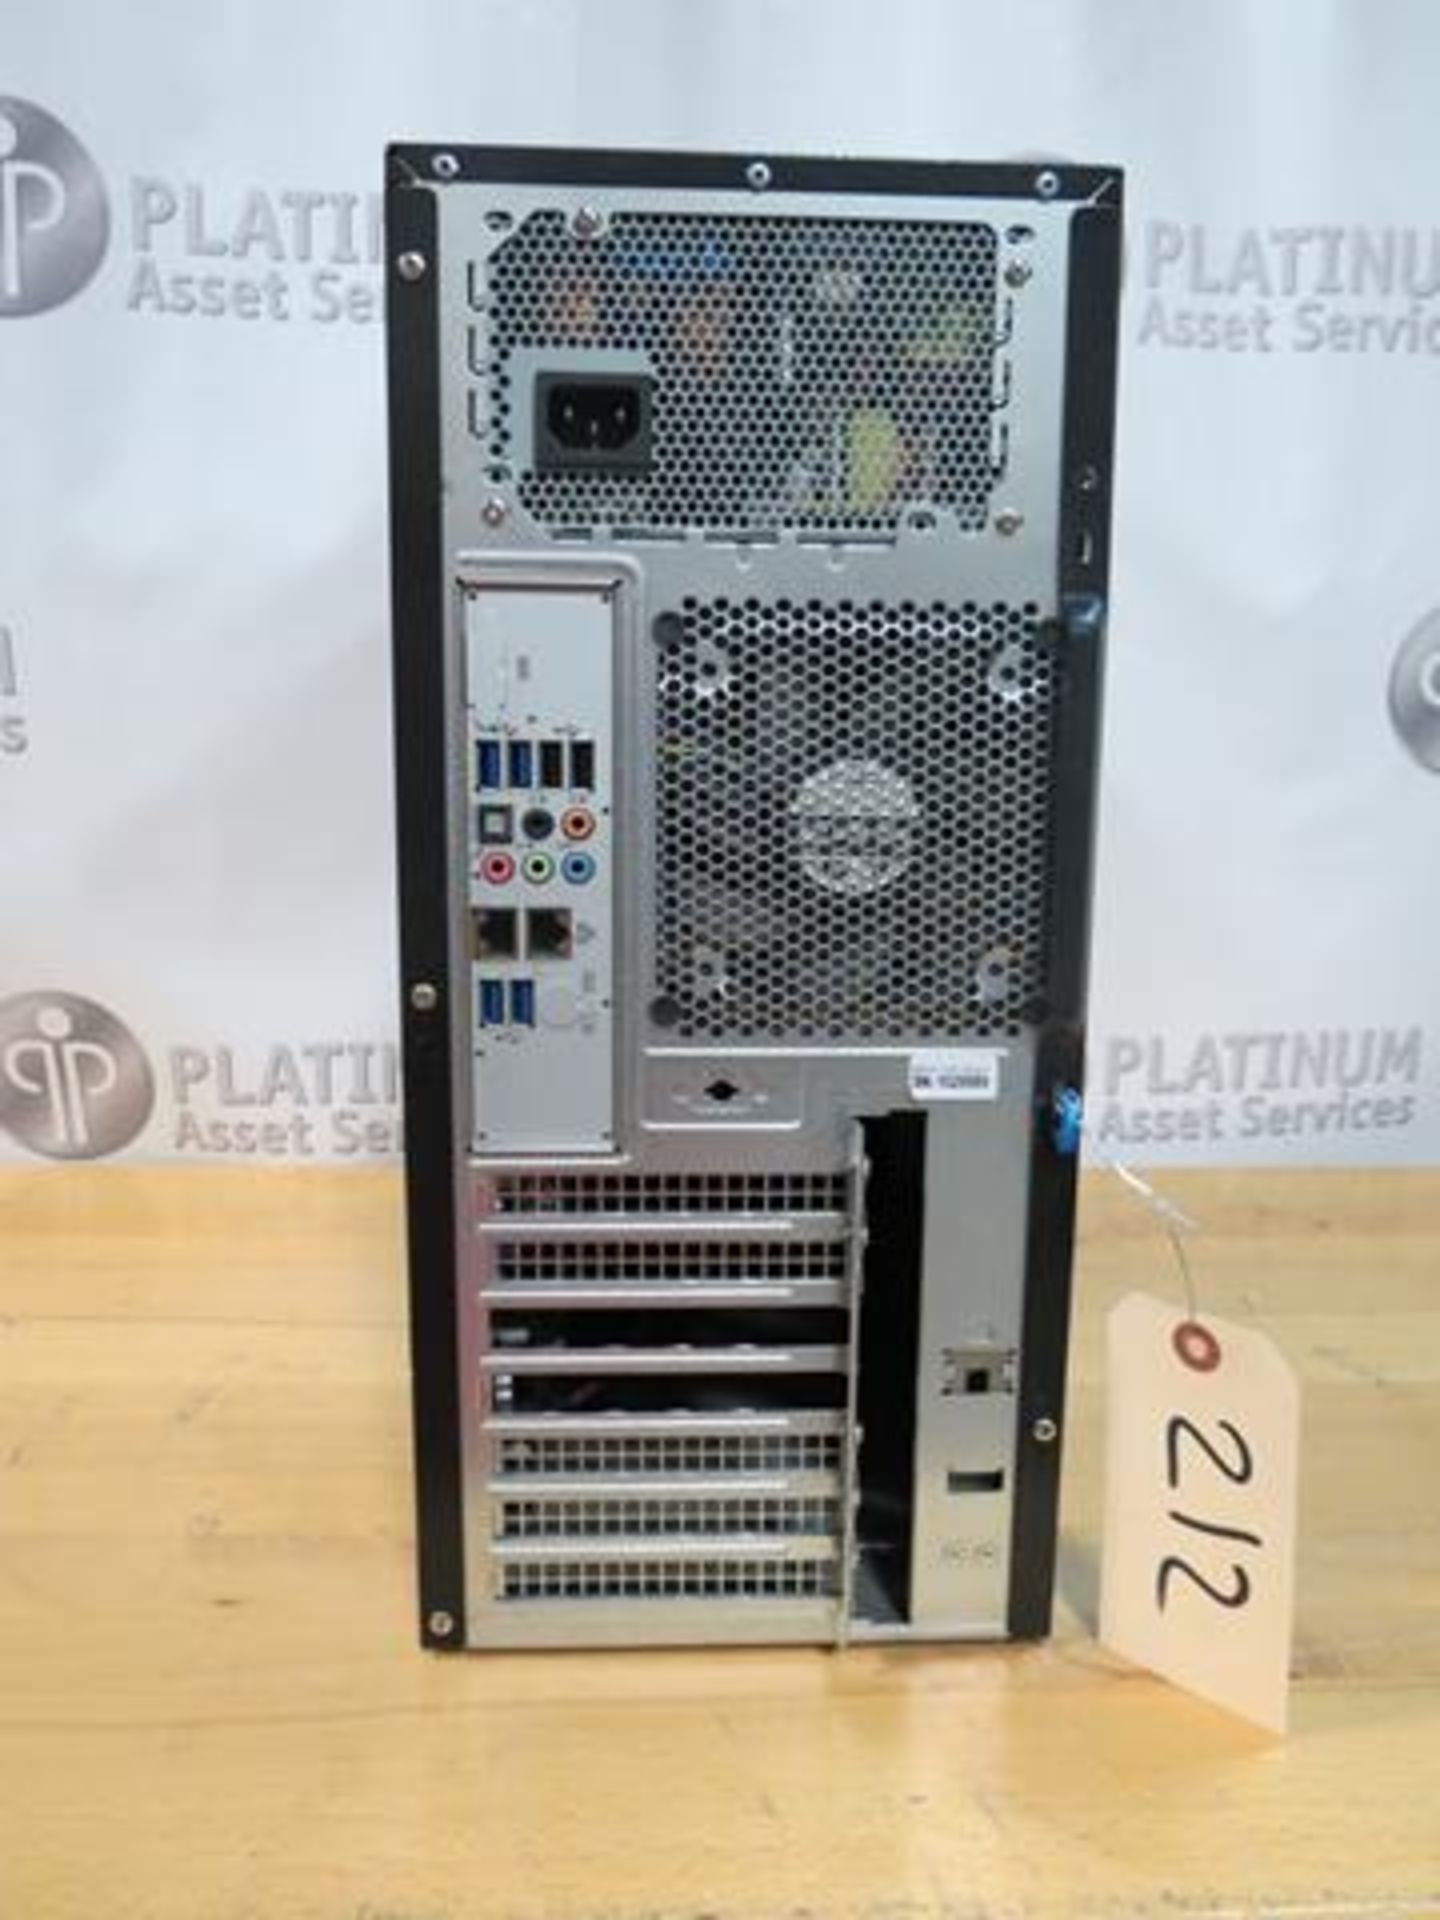 THINKMATE, SUPERMICRO, TOWER WORKSTATION (FUNCTIONALITY UNKNOWN) (TAG#212) - Image 2 of 4